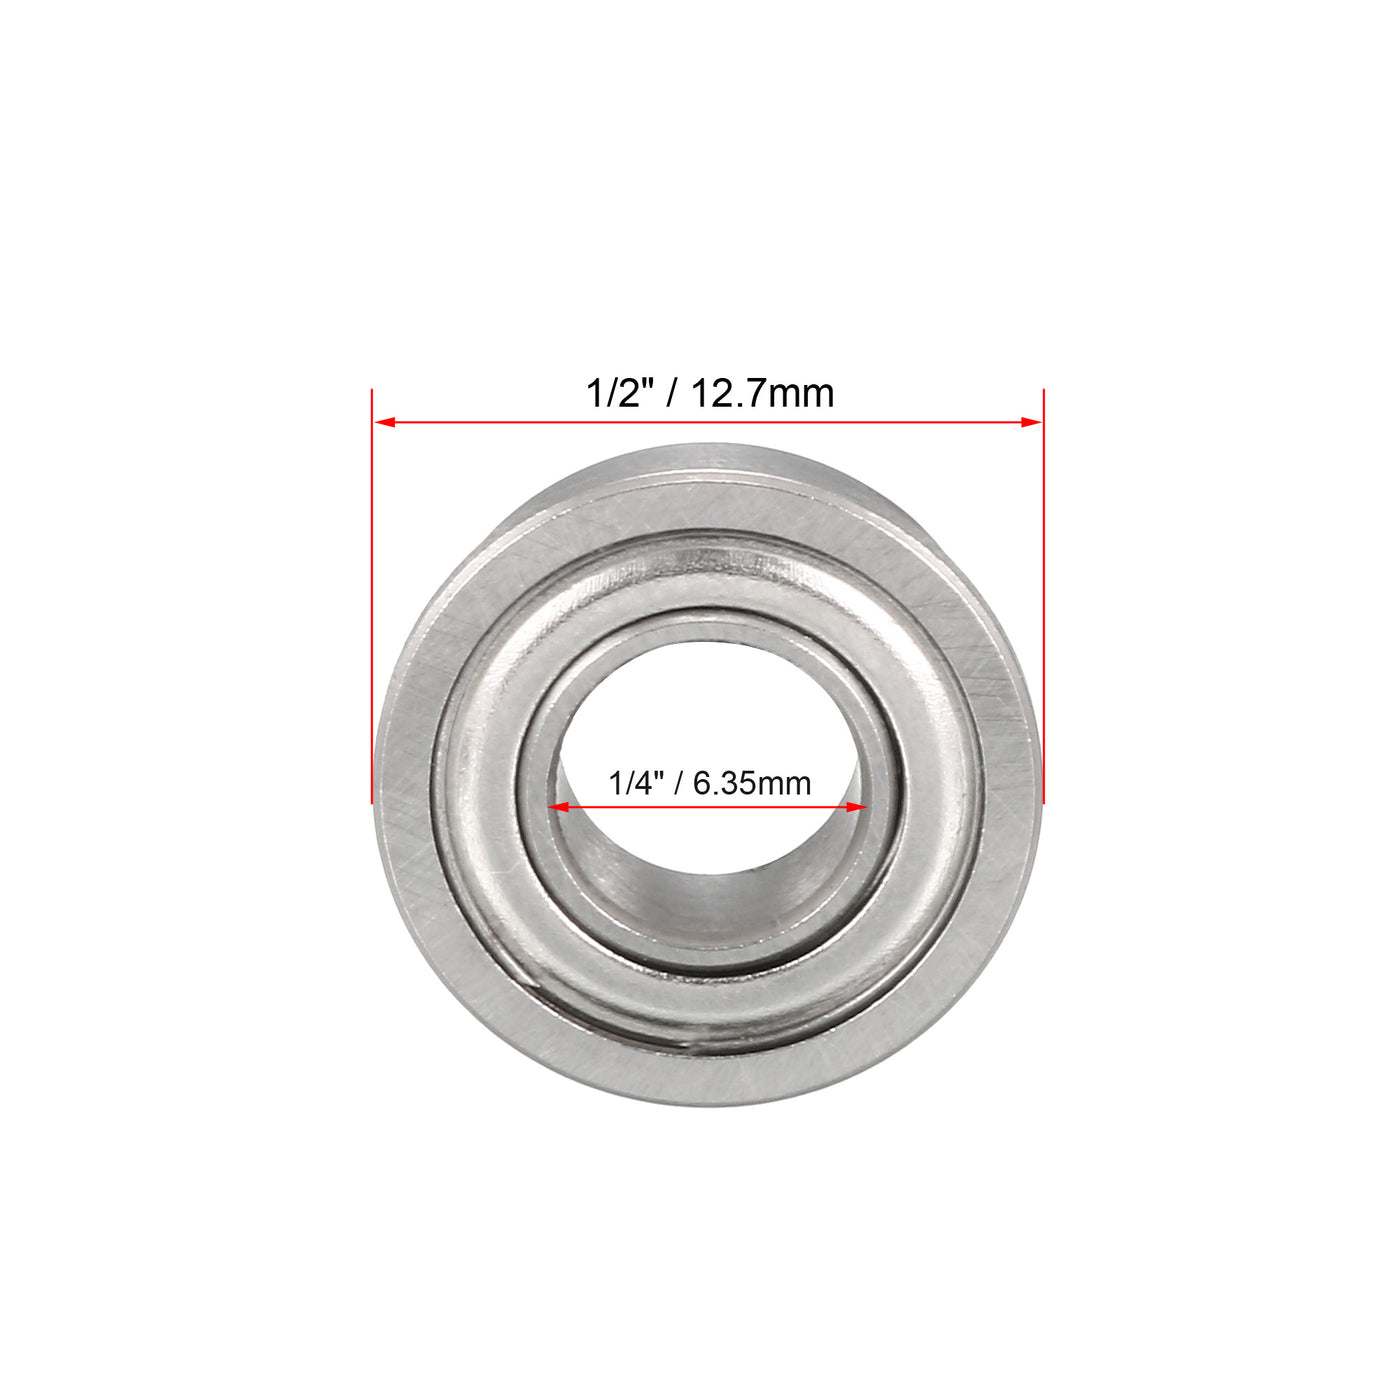 Uxcell Uxcell F688ZZ Flange Ball Bearing 8x16x5mm Shielded Chrome Steel Z2 Lever Bearings 2pcs